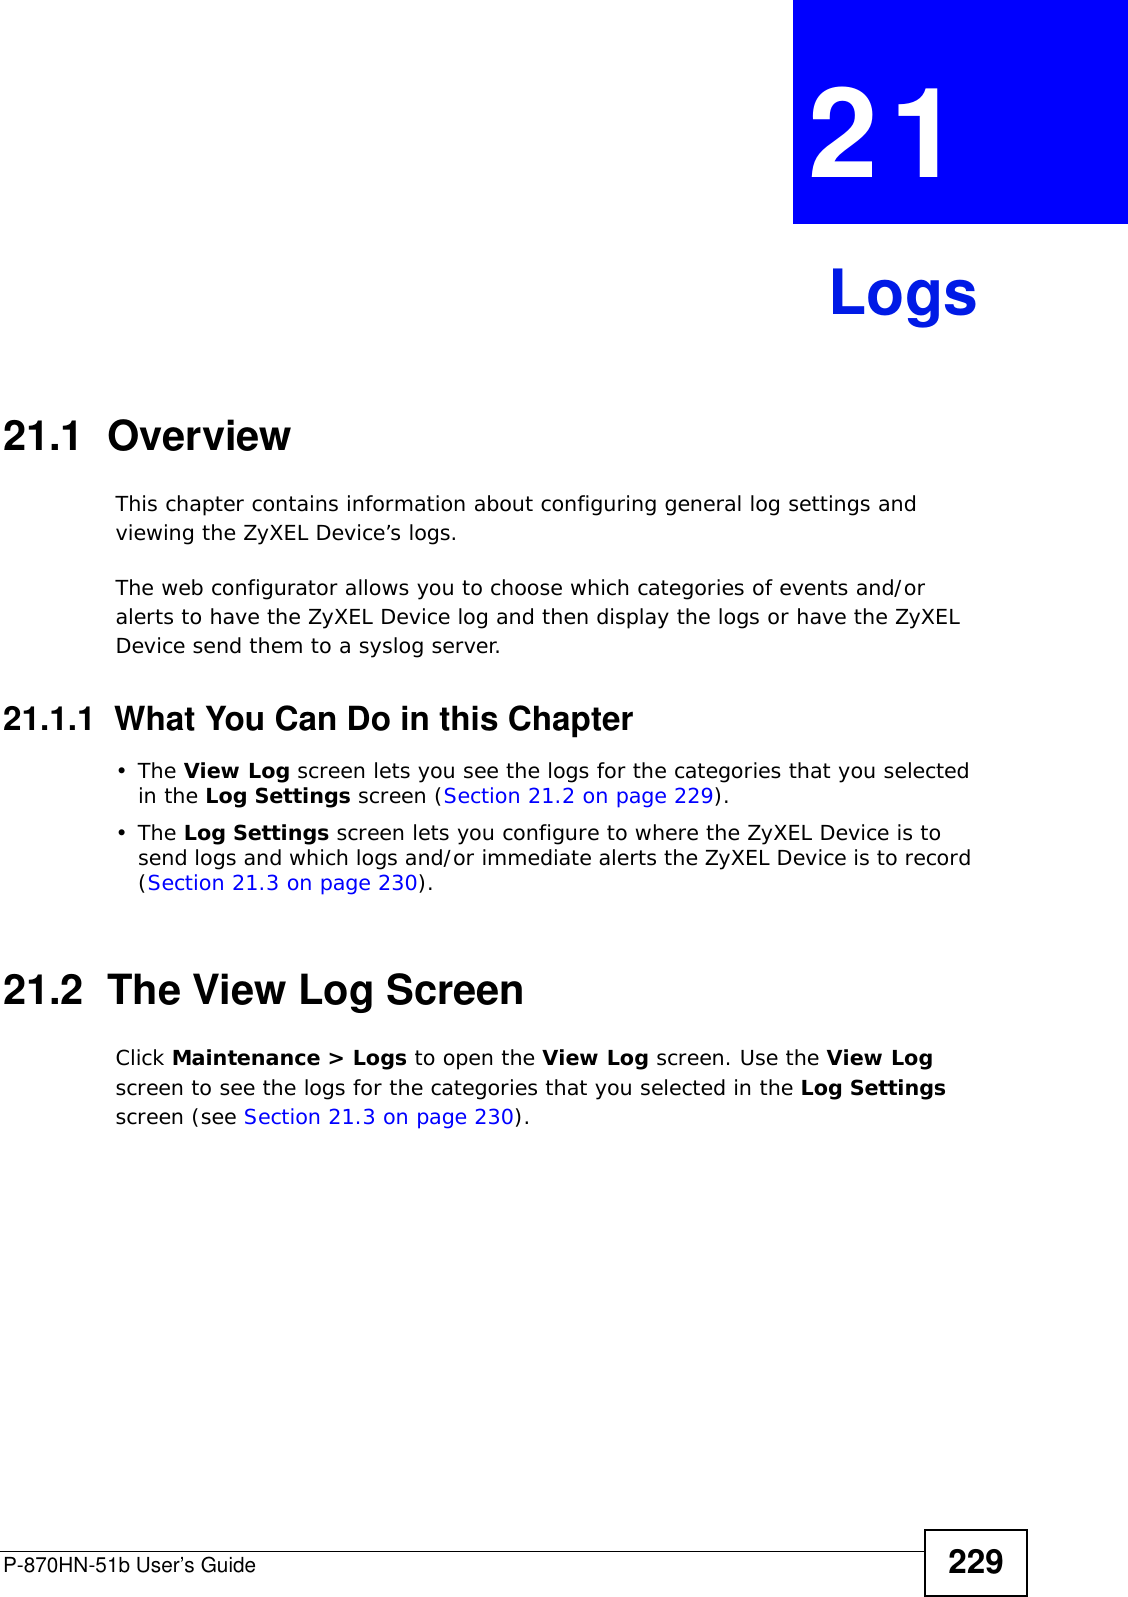 P-870HN-51b User’s Guide 229CHAPTER  21 Logs21.1  Overview This chapter contains information about configuring general log settings and viewing the ZyXEL Device’s logs.The web configurator allows you to choose which categories of events and/or alerts to have the ZyXEL Device log and then display the logs or have the ZyXEL Device send them to a syslog server. 21.1.1  What You Can Do in this Chapter•The View Log screen lets you see the logs for the categories that you selected in the Log Settings screen (Section 21.2 on page 229).•The Log Settings screen lets you configure to where the ZyXEL Device is to send logs and which logs and/or immediate alerts the ZyXEL Device is to record (Section 21.3 on page 230).21.2  The View Log ScreenClick Maintenance &gt; Logs to open the View Log screen. Use the View Log screen to see the logs for the categories that you selected in the Log Settings screen (see Section 21.3 on page 230). 